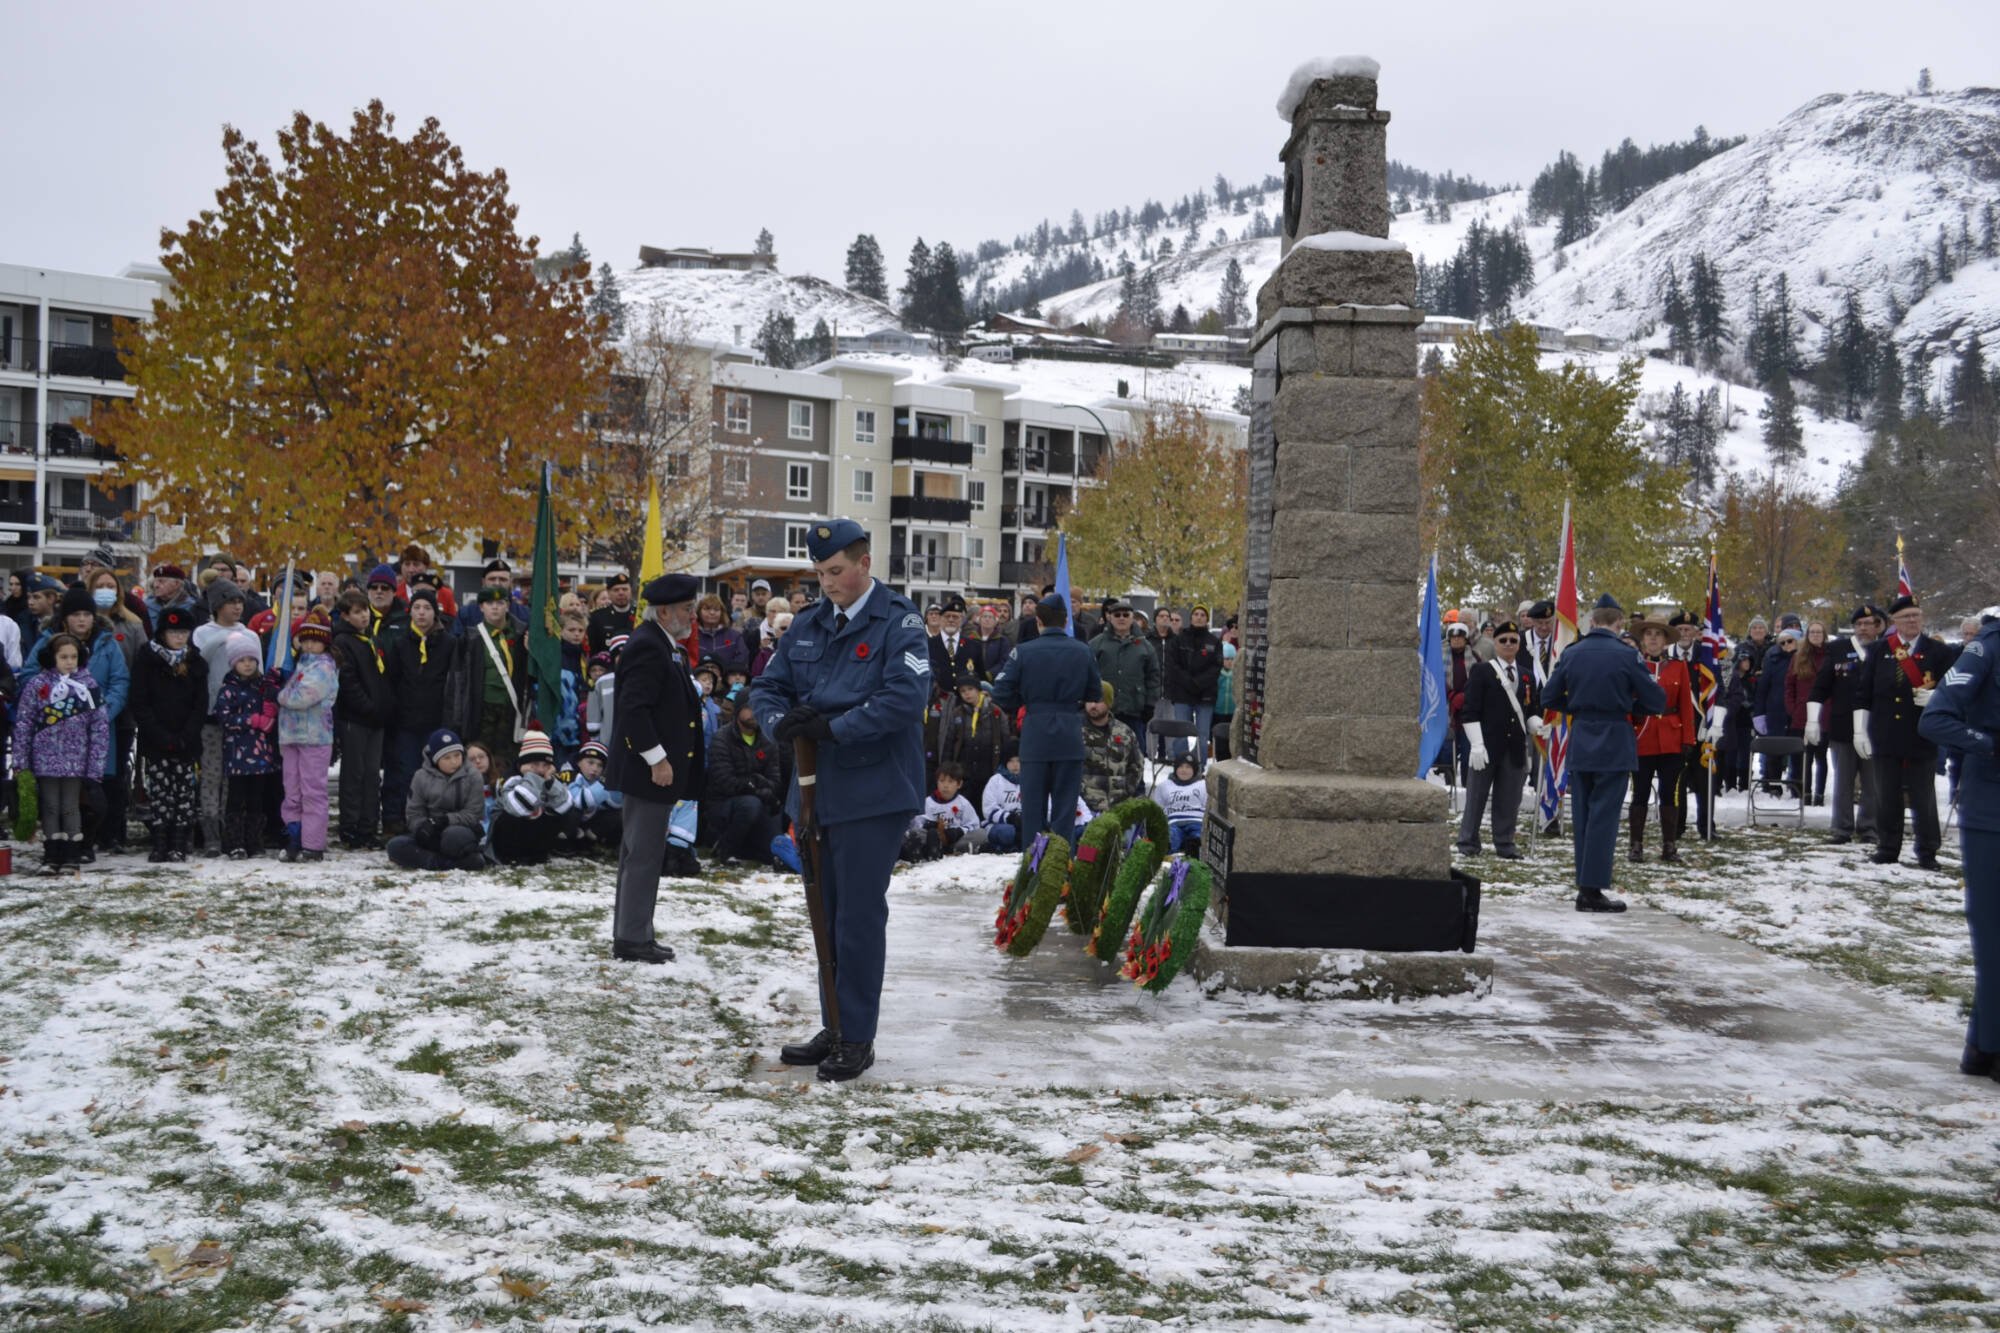 Summerland Legion past president John Dorn stands solemn at the cenotaph after laying a wreath on behalf of the Legion on Remembrance Day. That evening thieves broke into the Legion stealing all the poppy and Remembrance Day donations. (Monique Tamminga Western News)